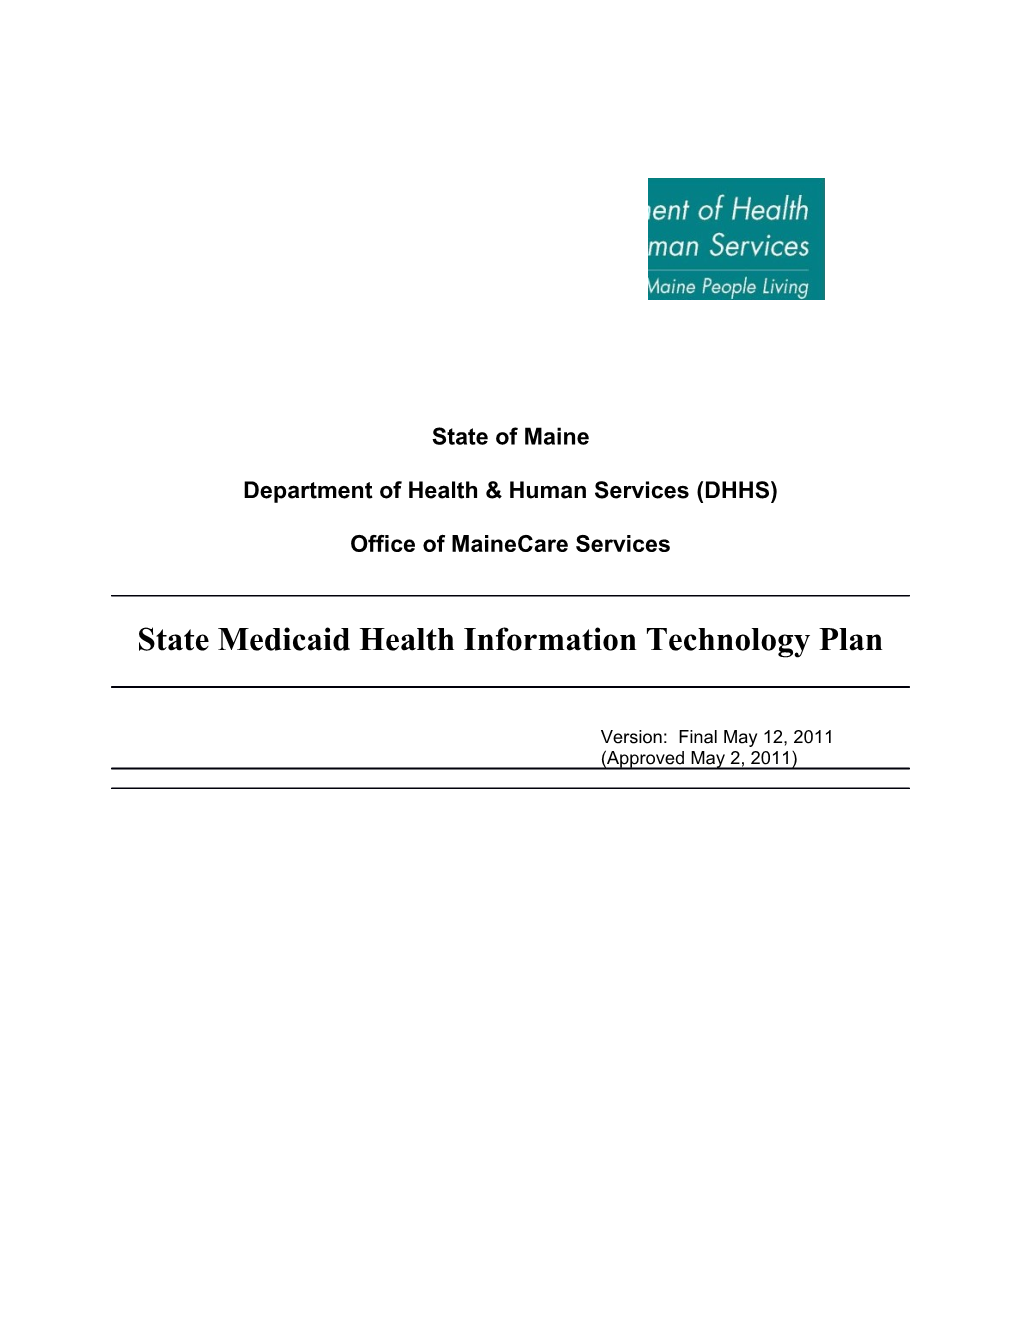 Department of Health & Human Services (DHHS)